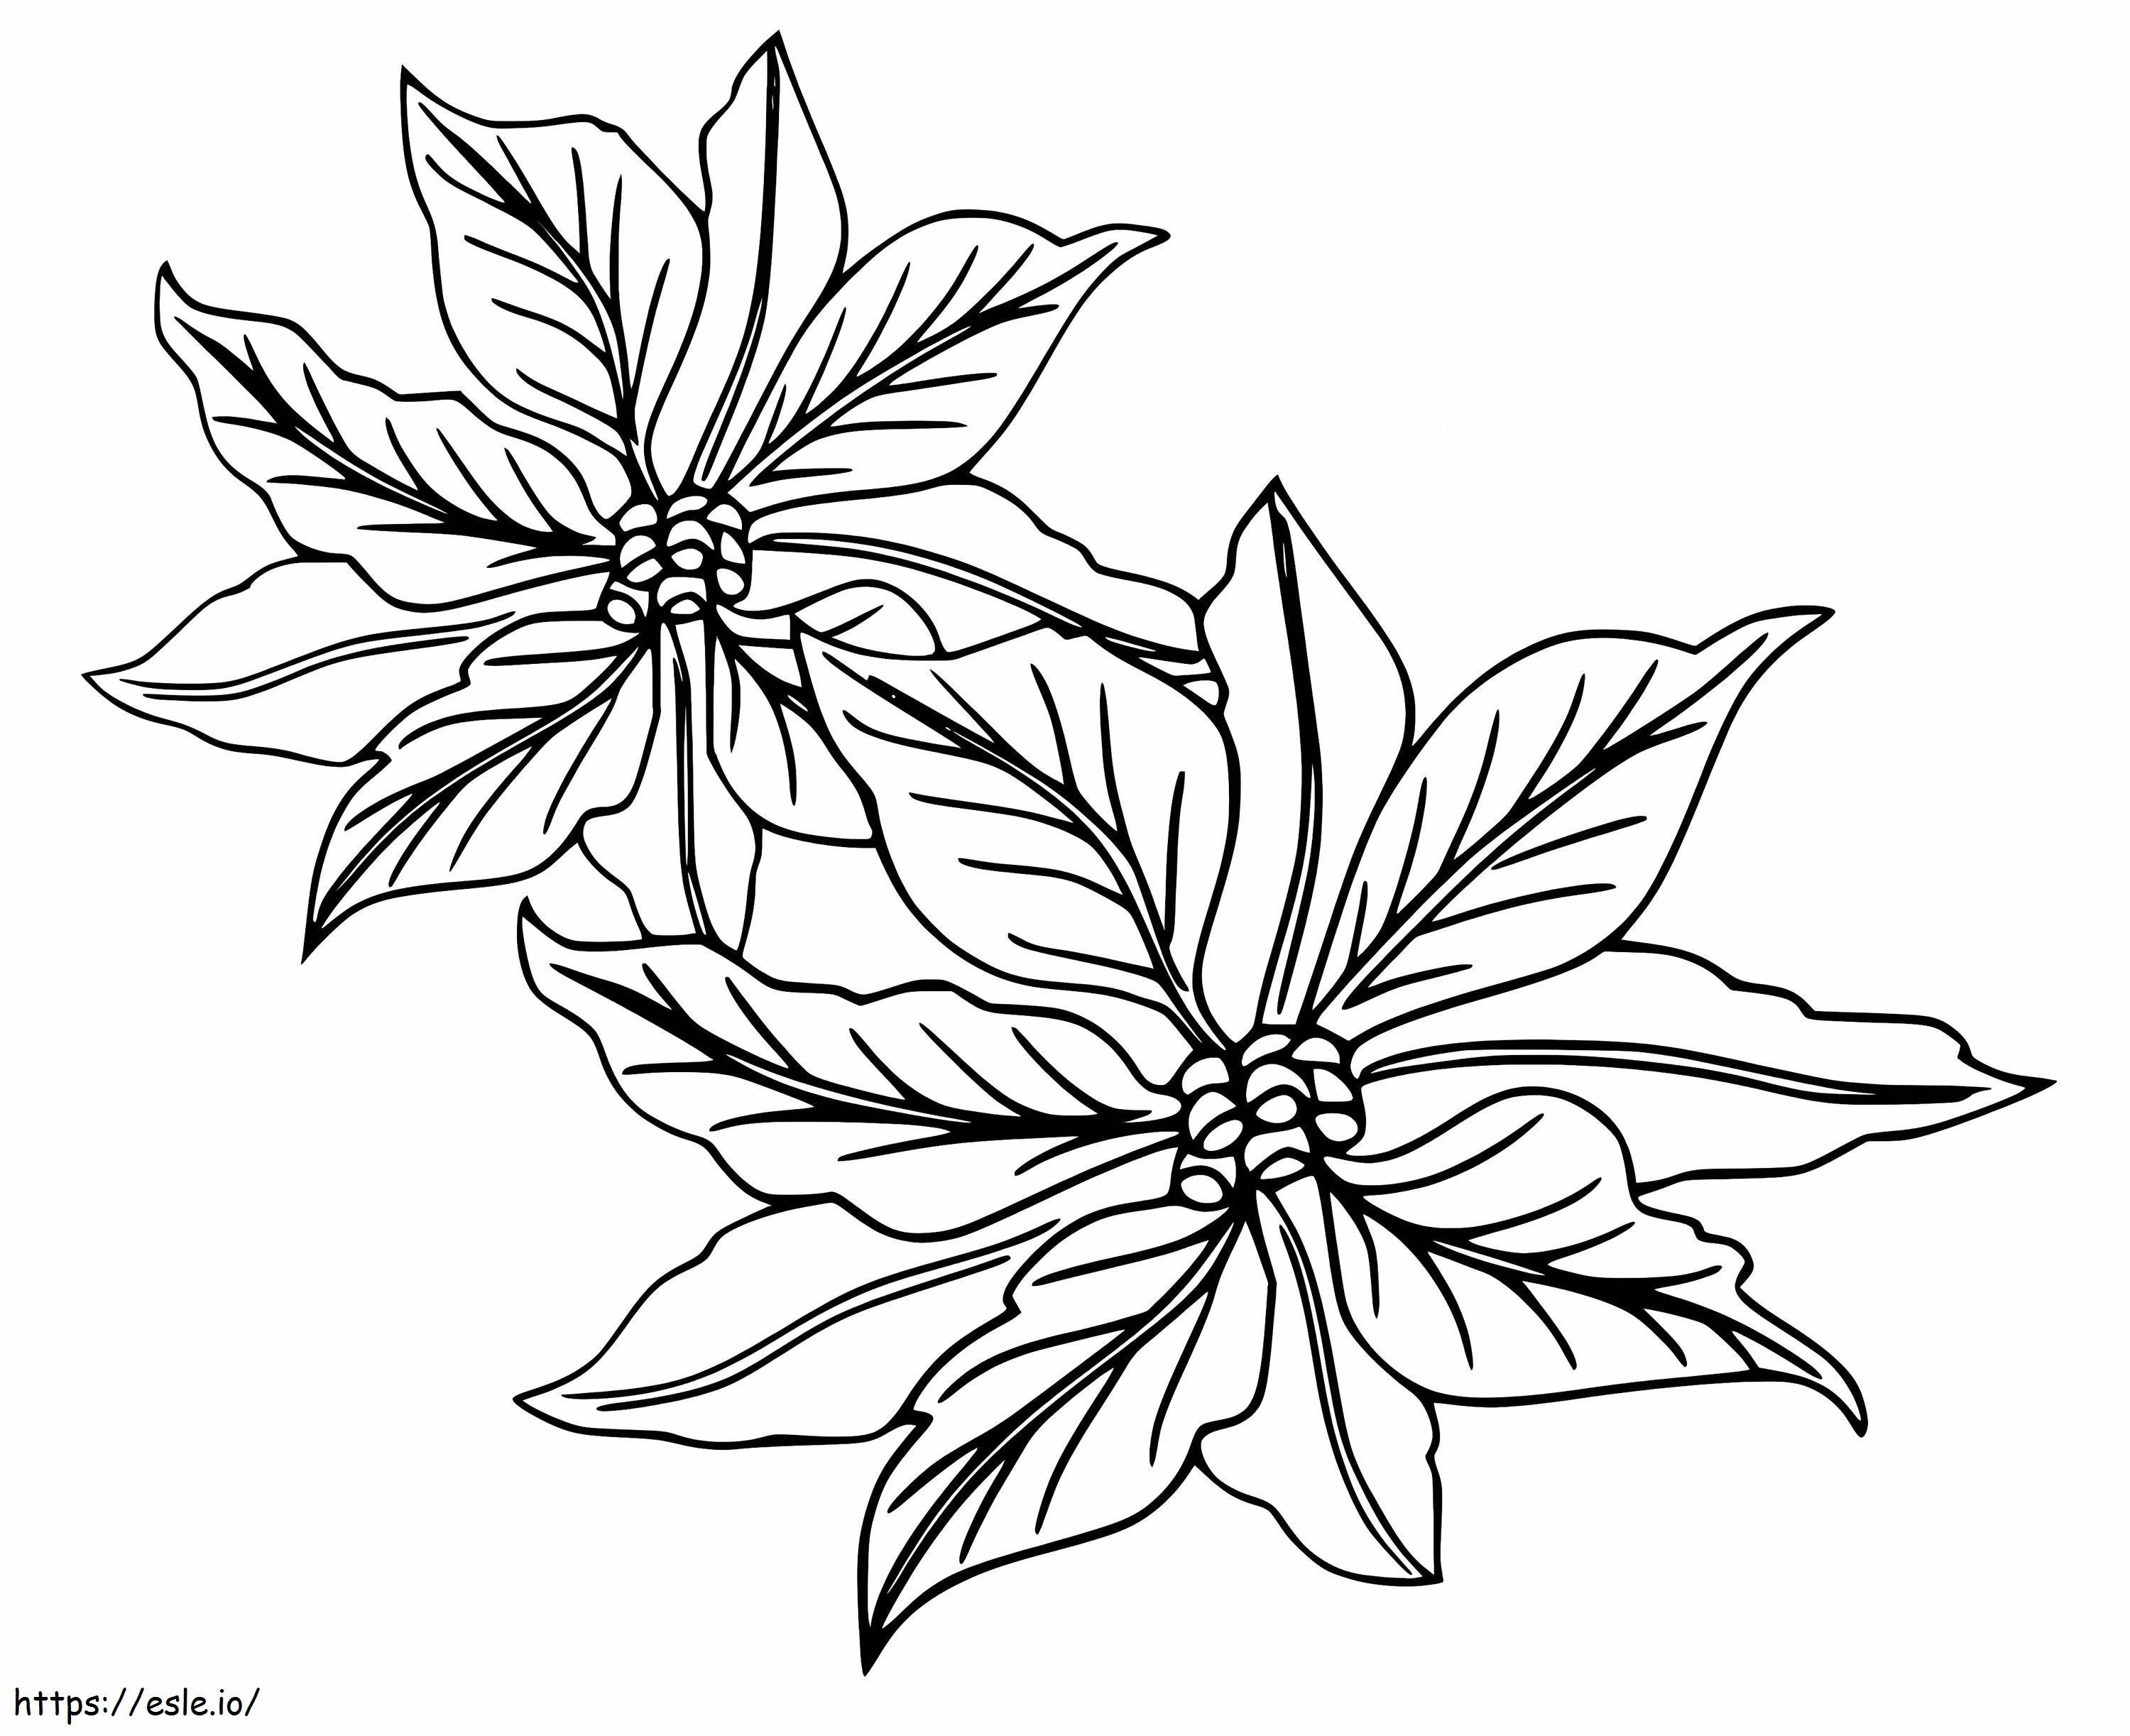 Poinsettia Flowers coloring page